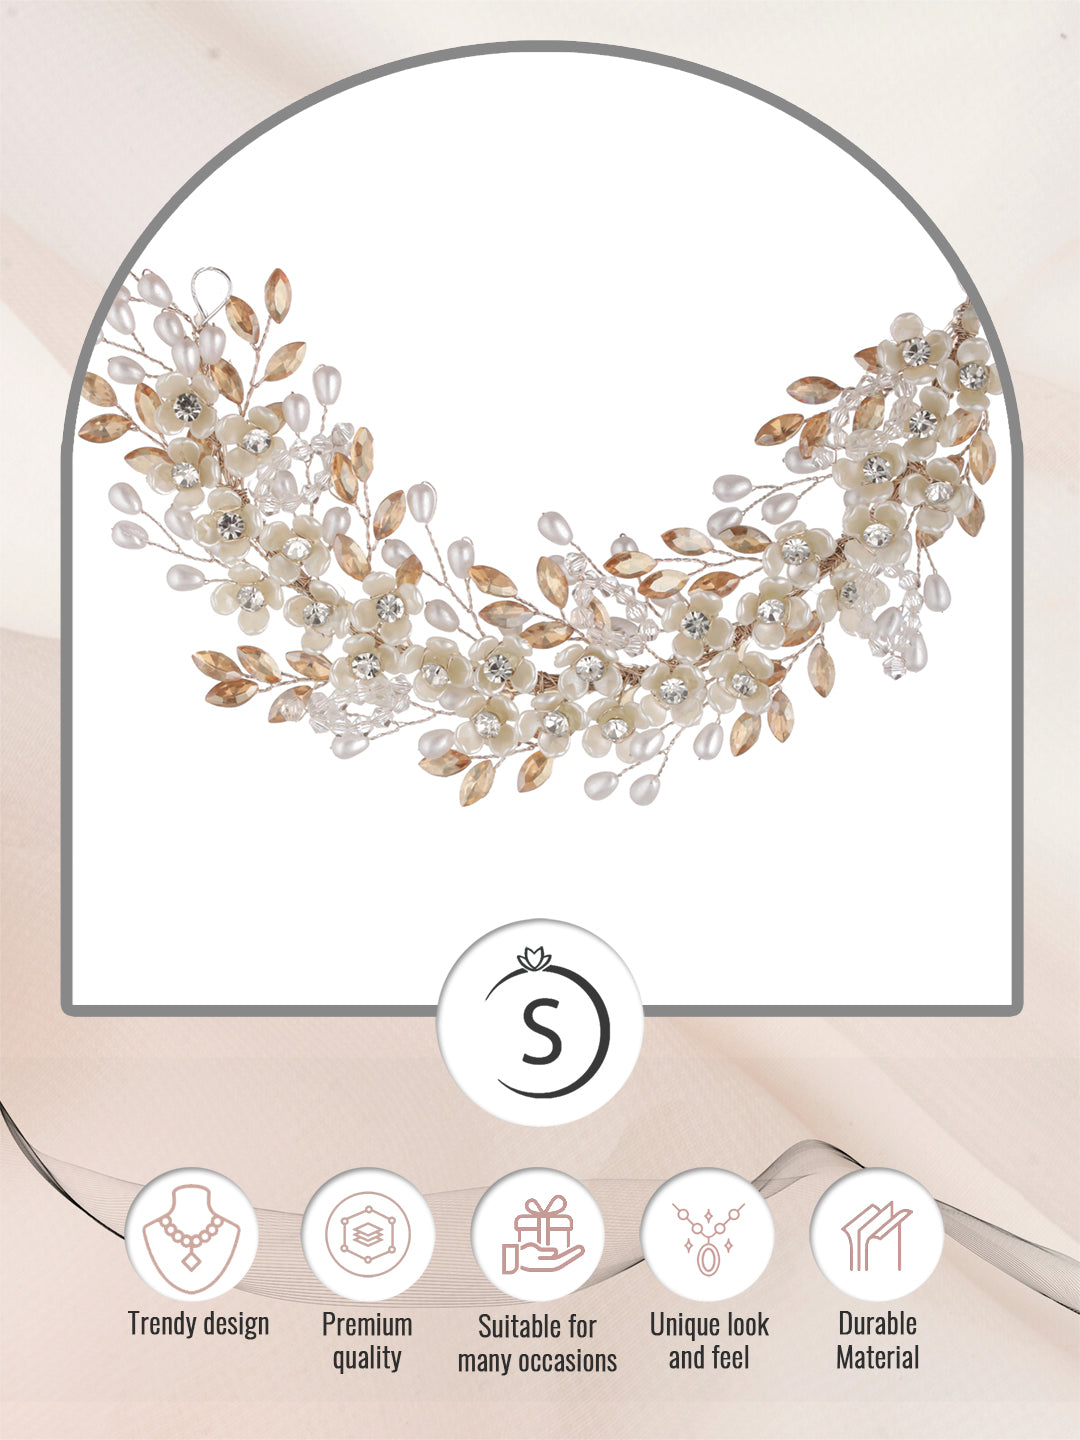 Gold Toned Off White Floral Pearl Embellished Hair Styling Tiara, zaveri pearls, sale price rs, sale price, sale gold plated, sale gold, sale, rubans, ring, regular price, priyassi jewellery,